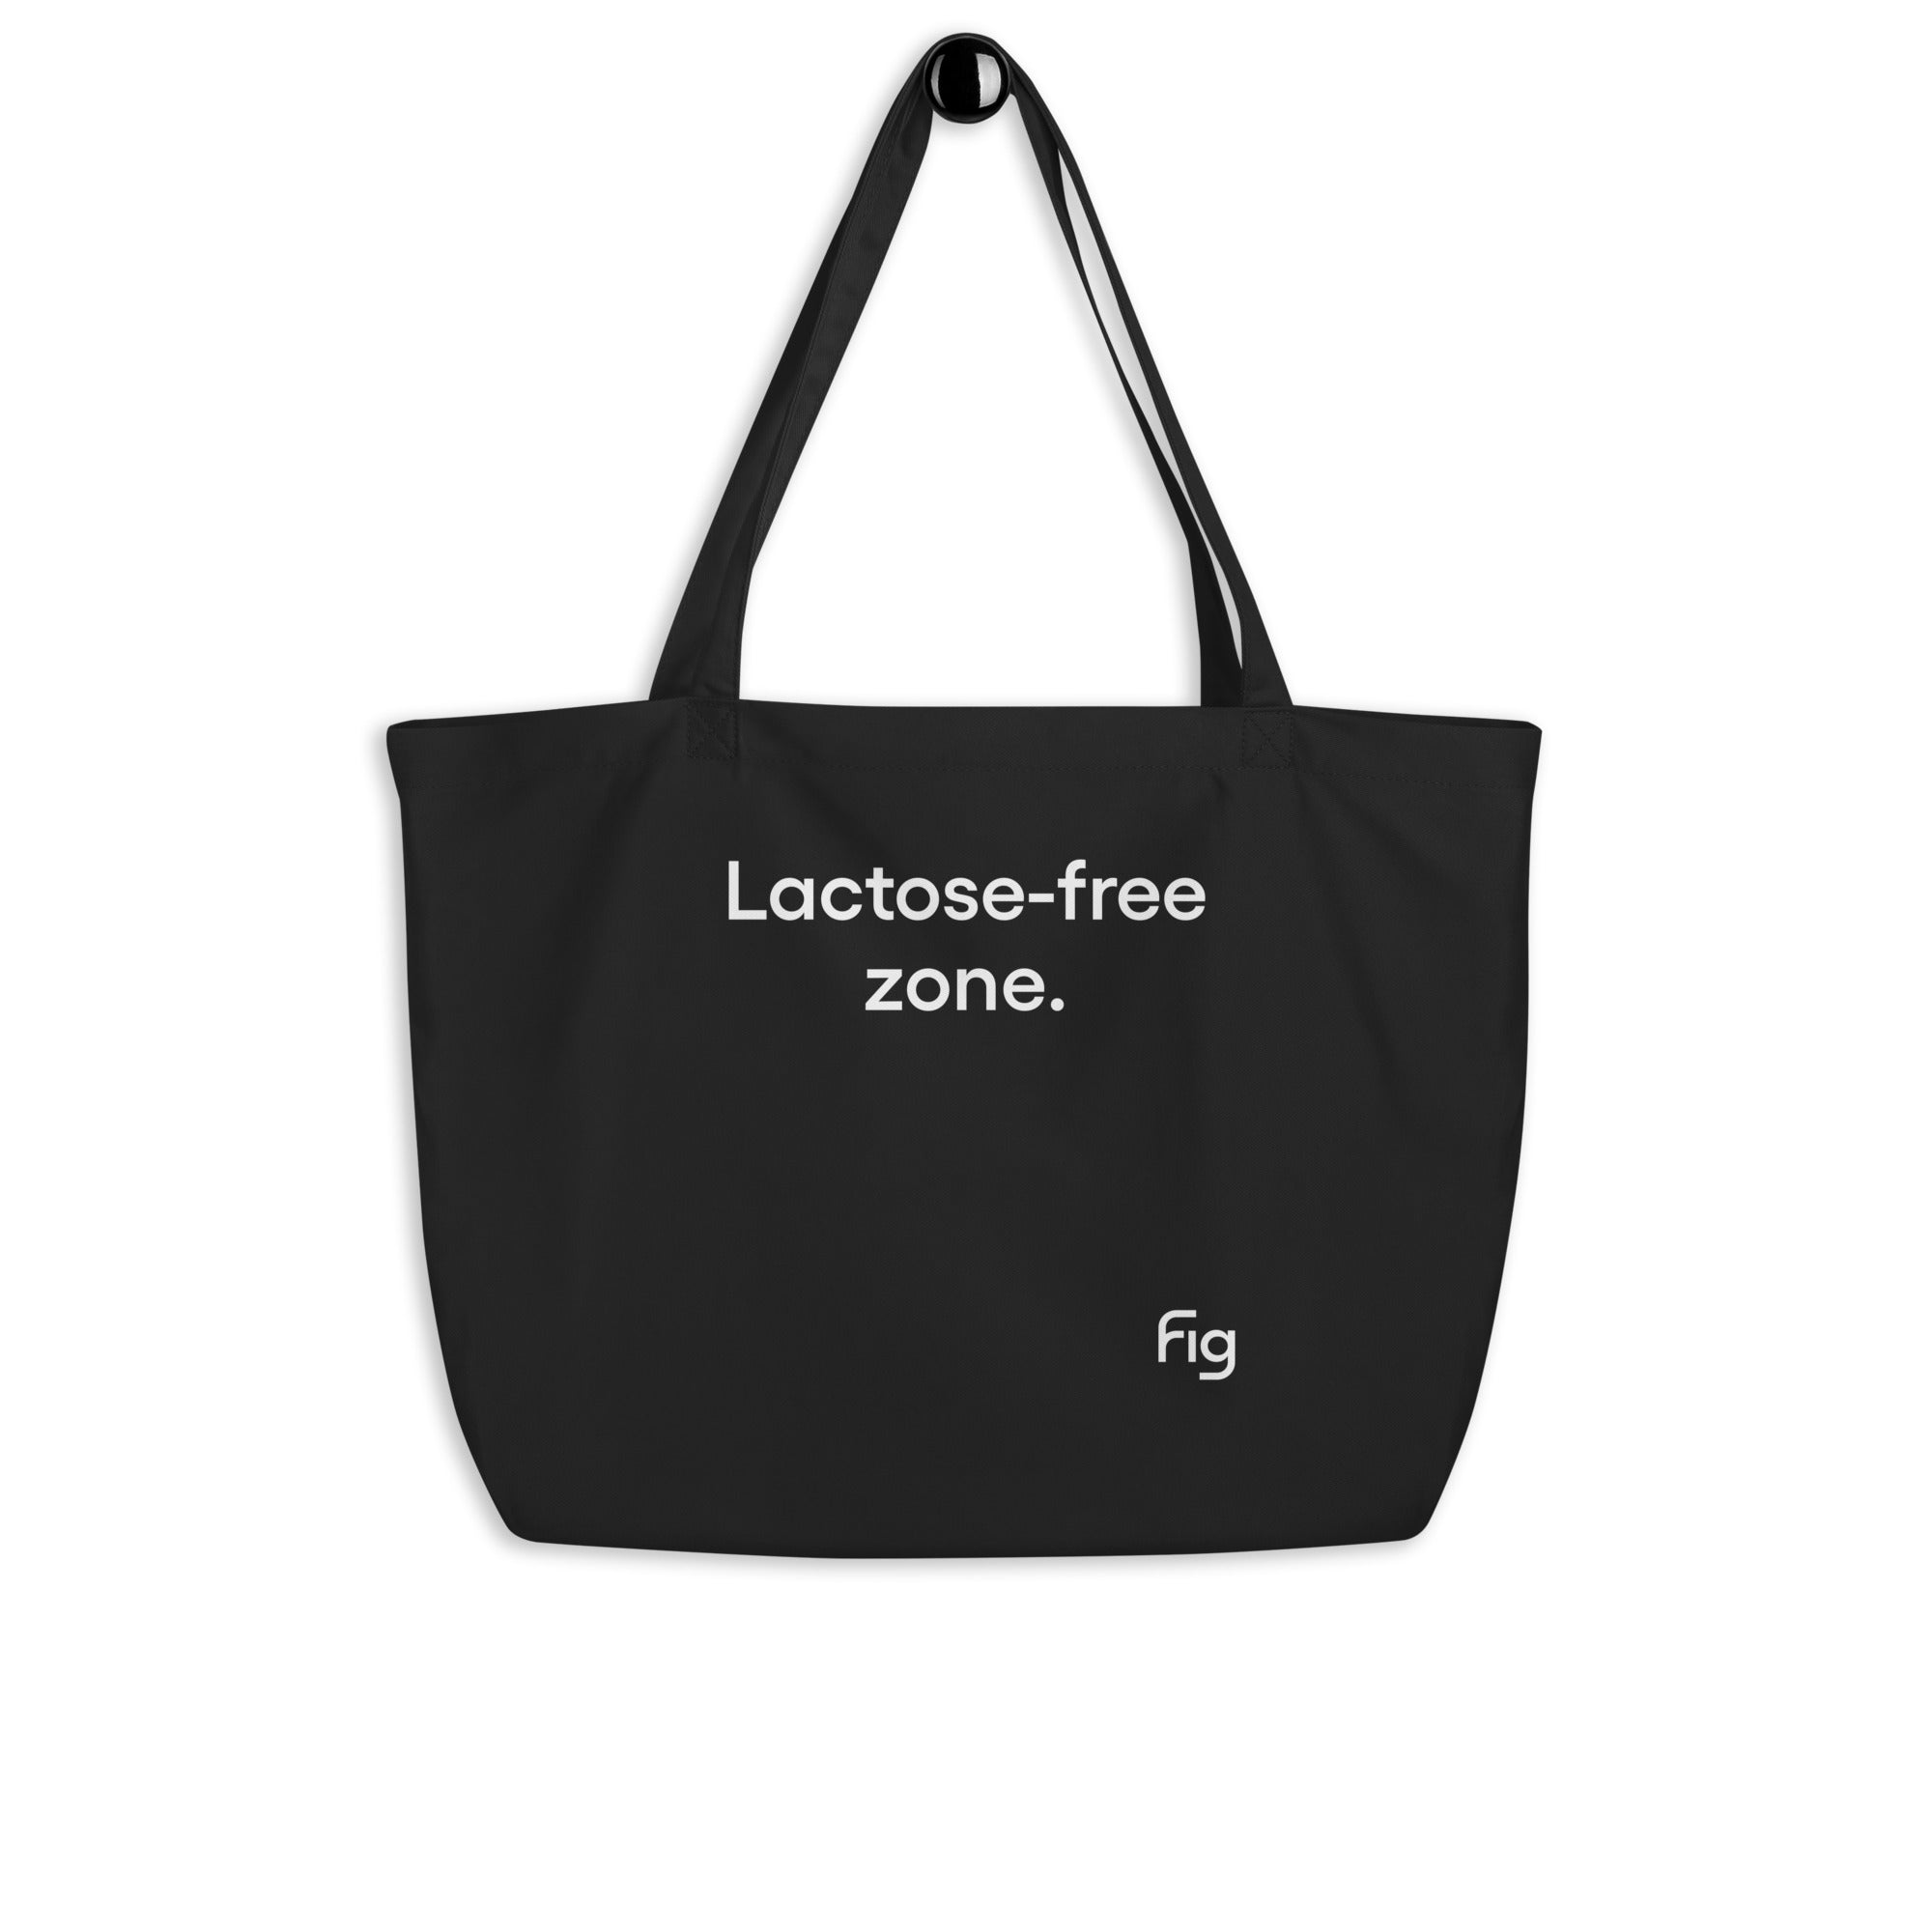 Lactose-free zone | Large organic tote bag – Fig Merch Store